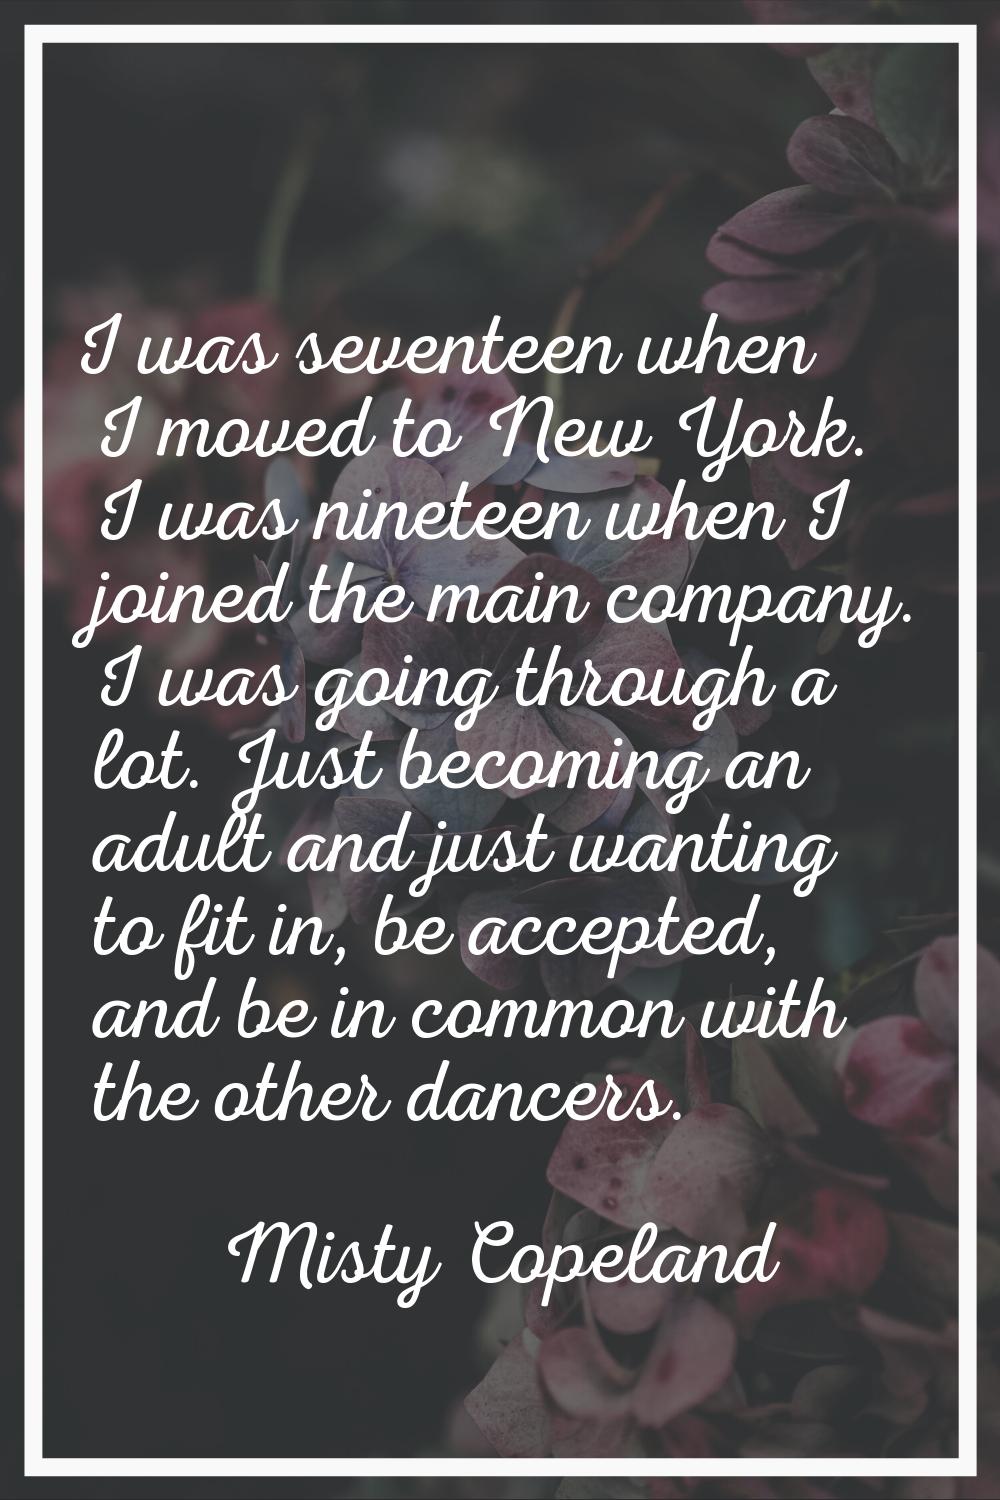 I was seventeen when I moved to New York. I was nineteen when I joined the main company. I was goin